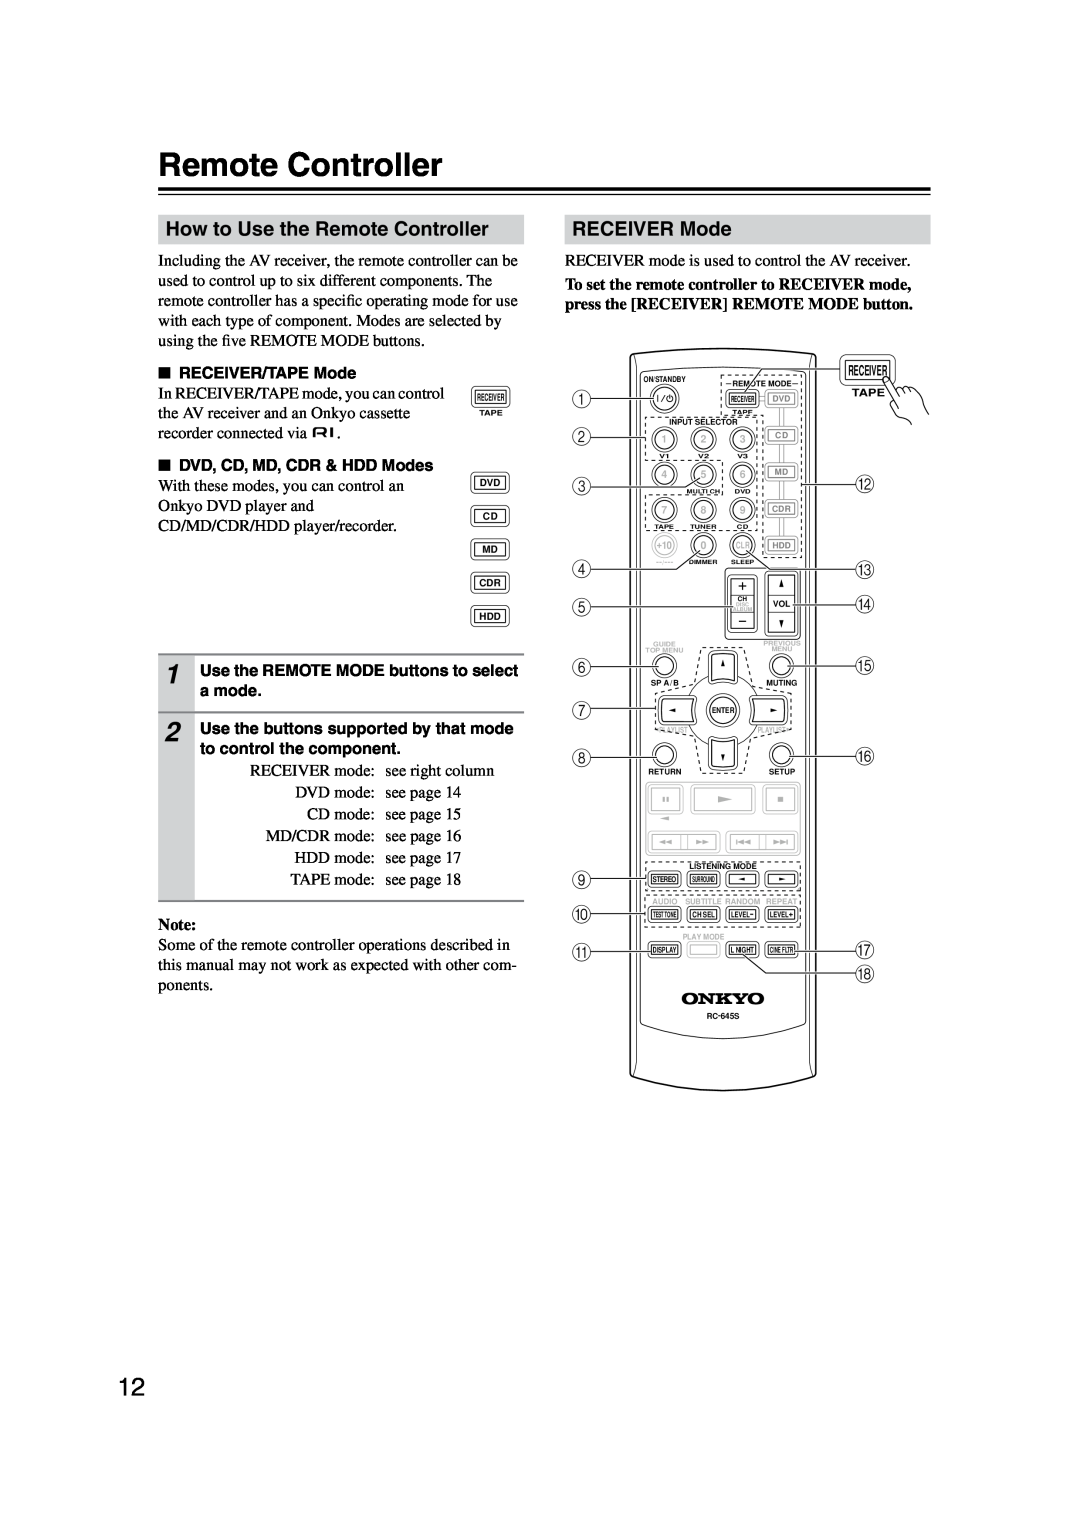 Onkyo HT-S4100 instruction manual How to Use the Remote Controller, RECEIVER Mode 